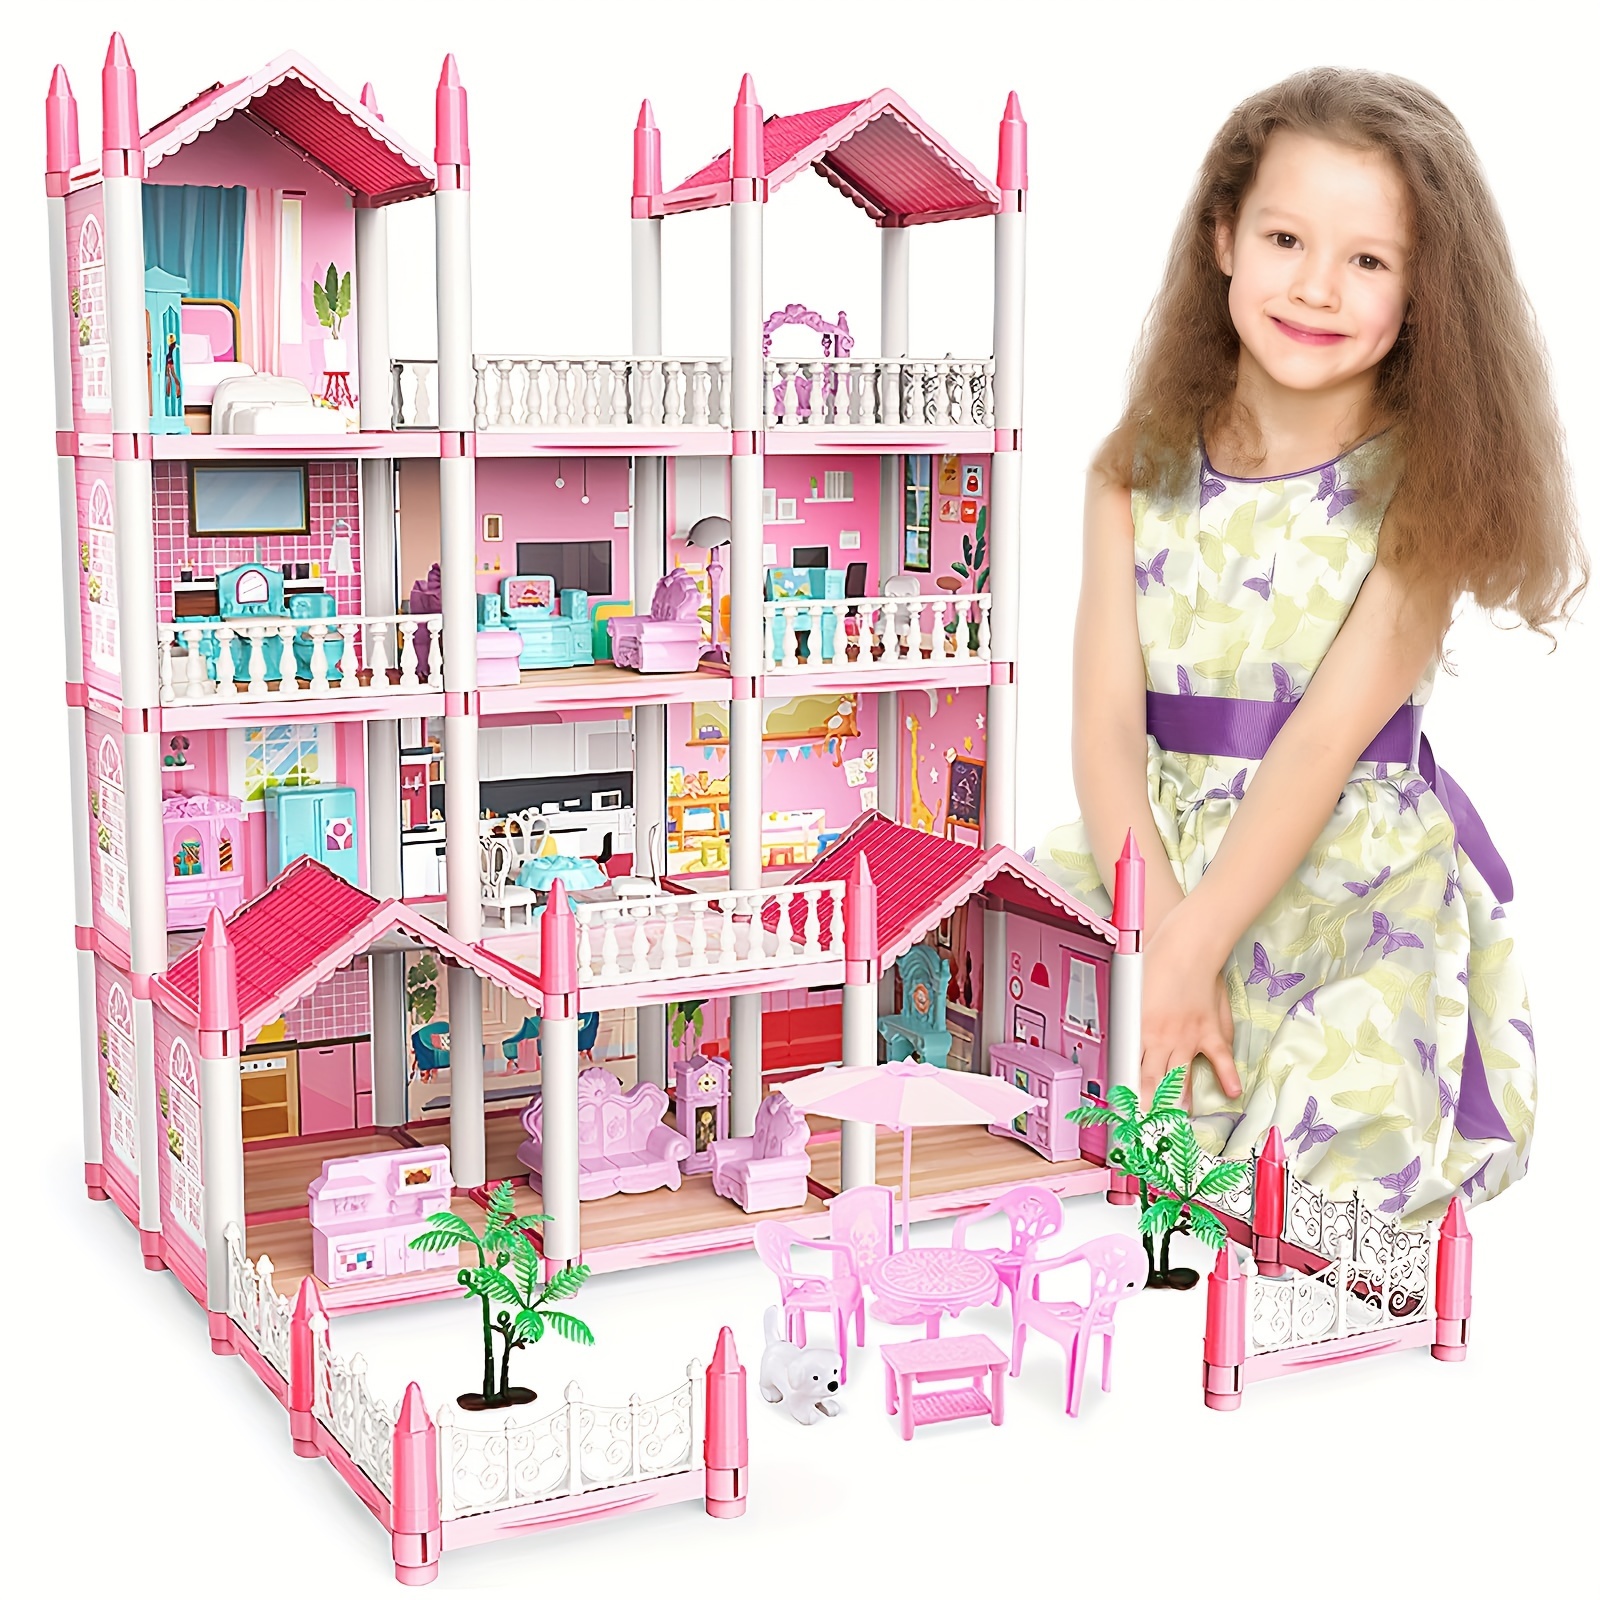 

Doll House For Girls, 14 Rooms Dollhouse With Dolls Figure, Puppies, Furnitures, Accessories, Led Light, Toddler Playhouse Gift For For 3-10 Year Old Girls Toys (pink)